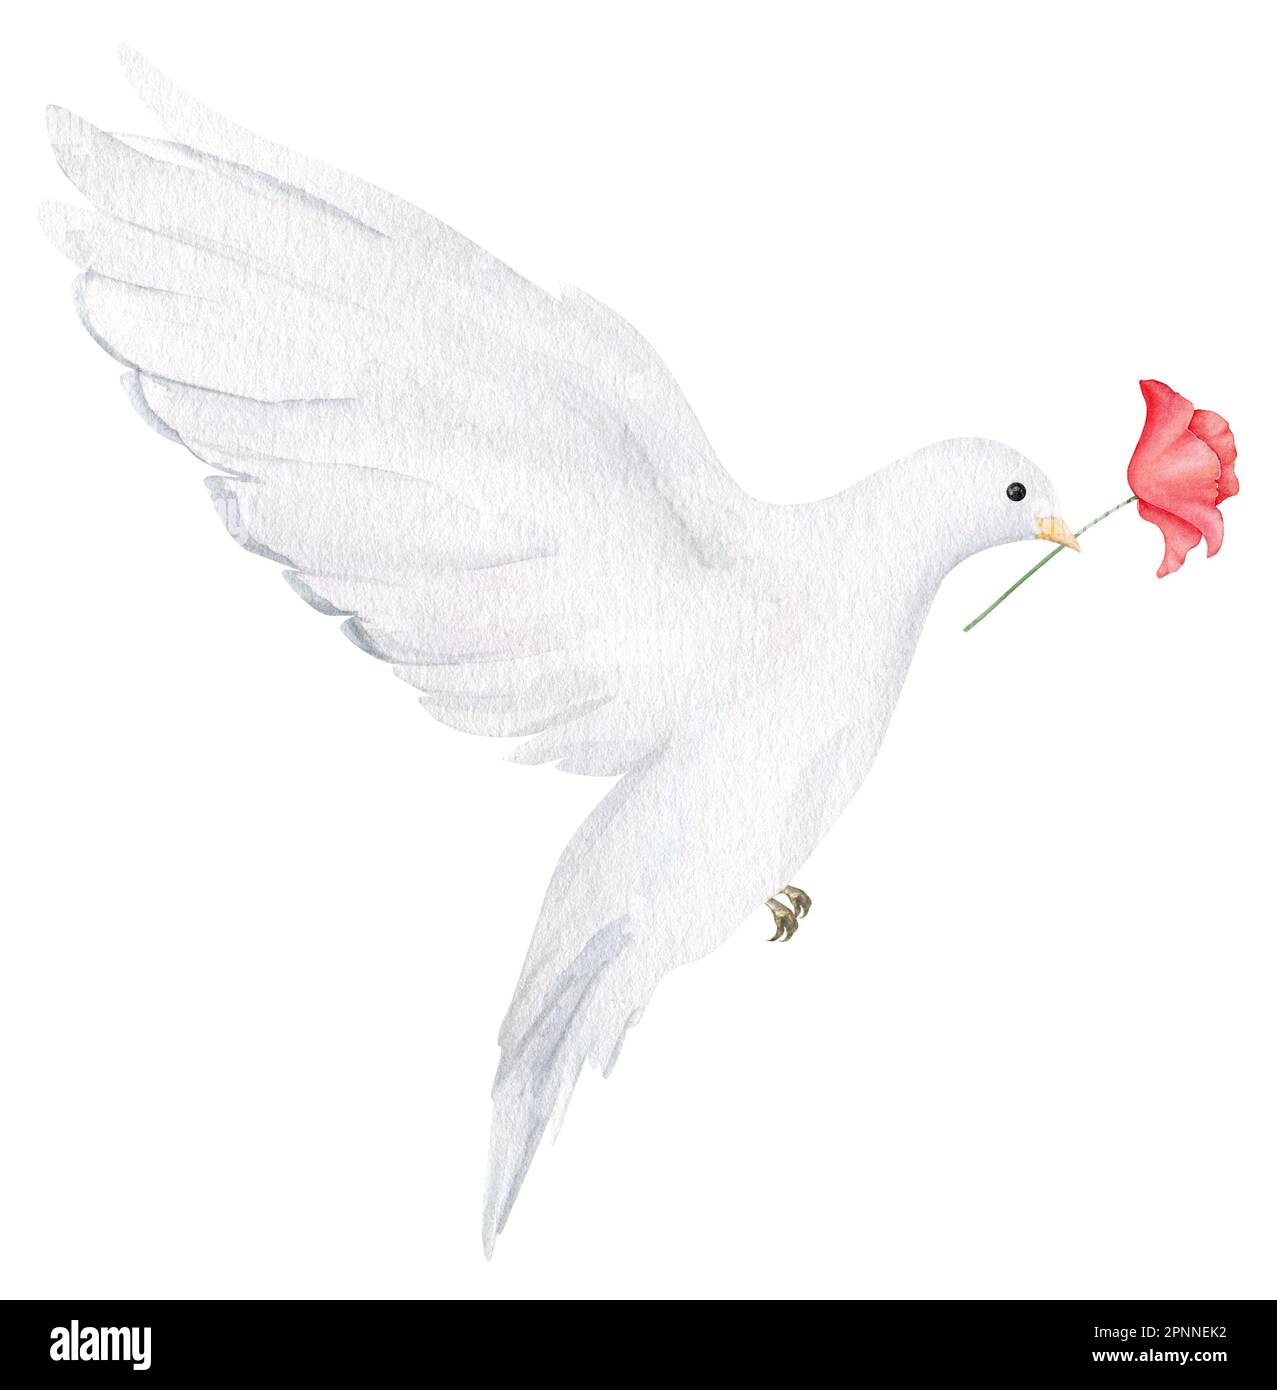 Hand drawn white dove with red poppy flower. Watercolor design element for Remembrance Day, Anzac Day. Stock Photo